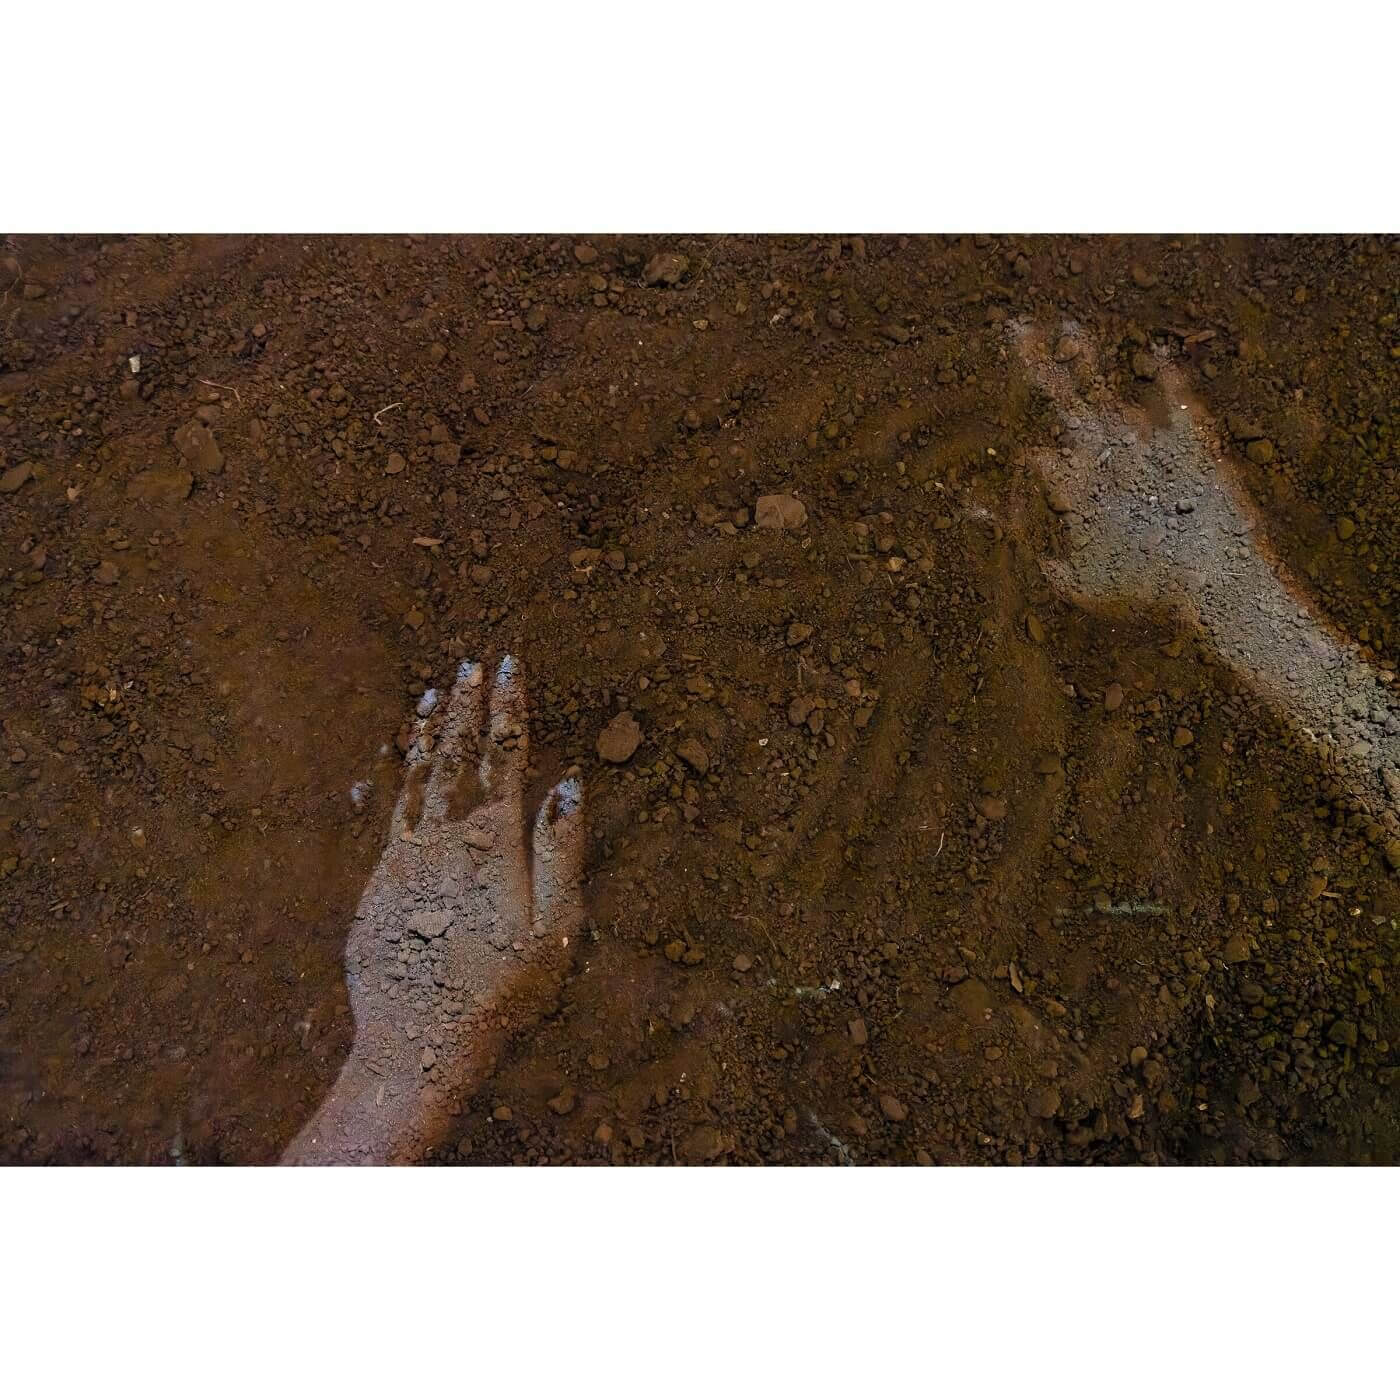 Monica Rani Rudhar EMERGING art prize installation hands in the dirt